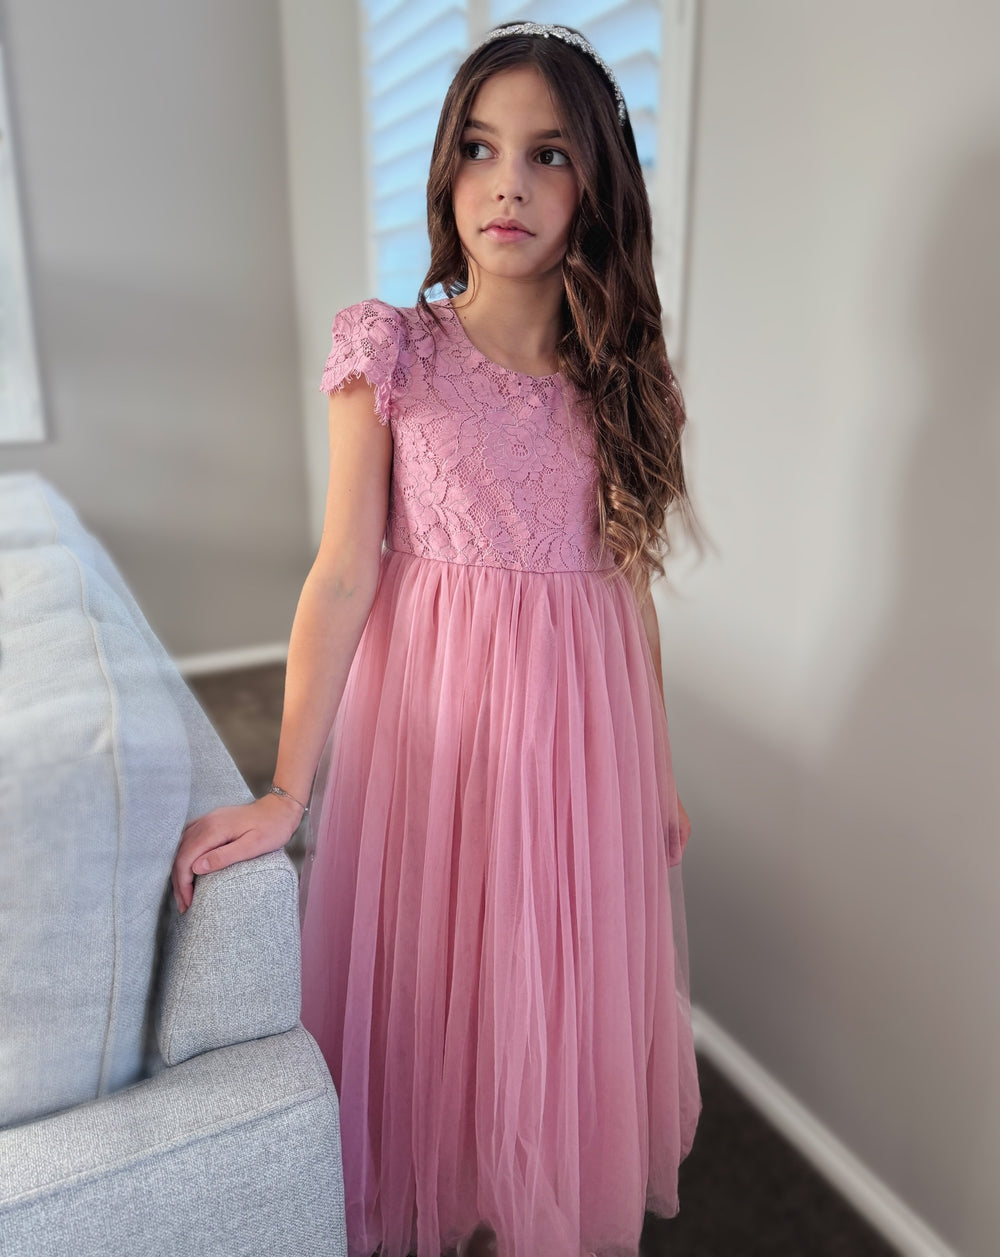 Serenade Girls Dusty Rose Lace Dress - All Products